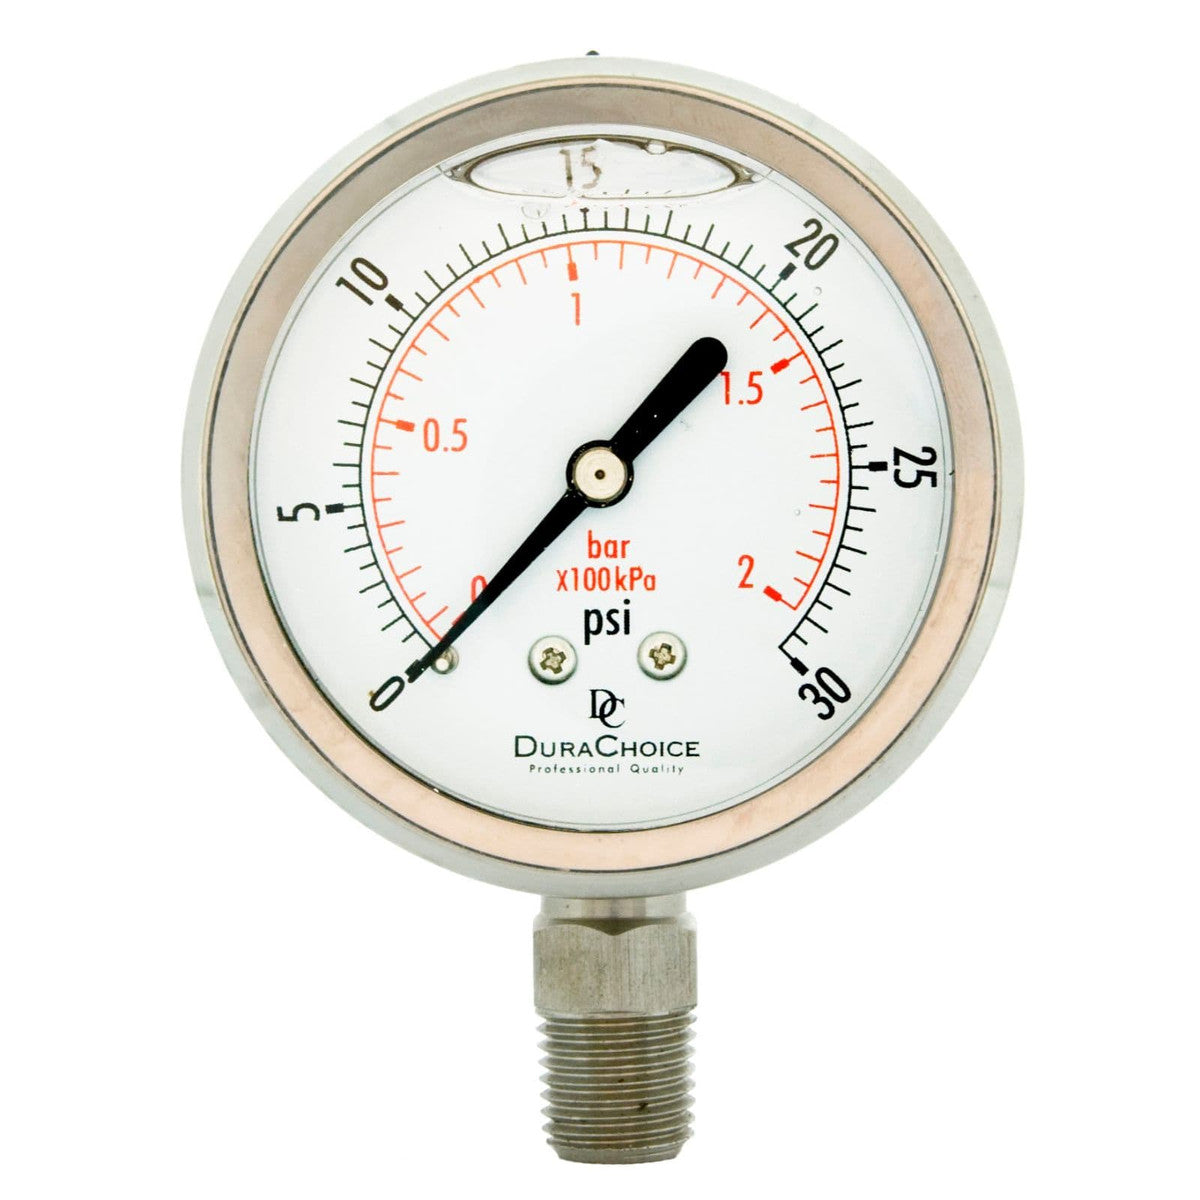 2-1/2" All Stainless Steel Oil Filled Pressure Gauge - 1/4" NPT Lower Mount 100PSI - (City Of Cocoa)